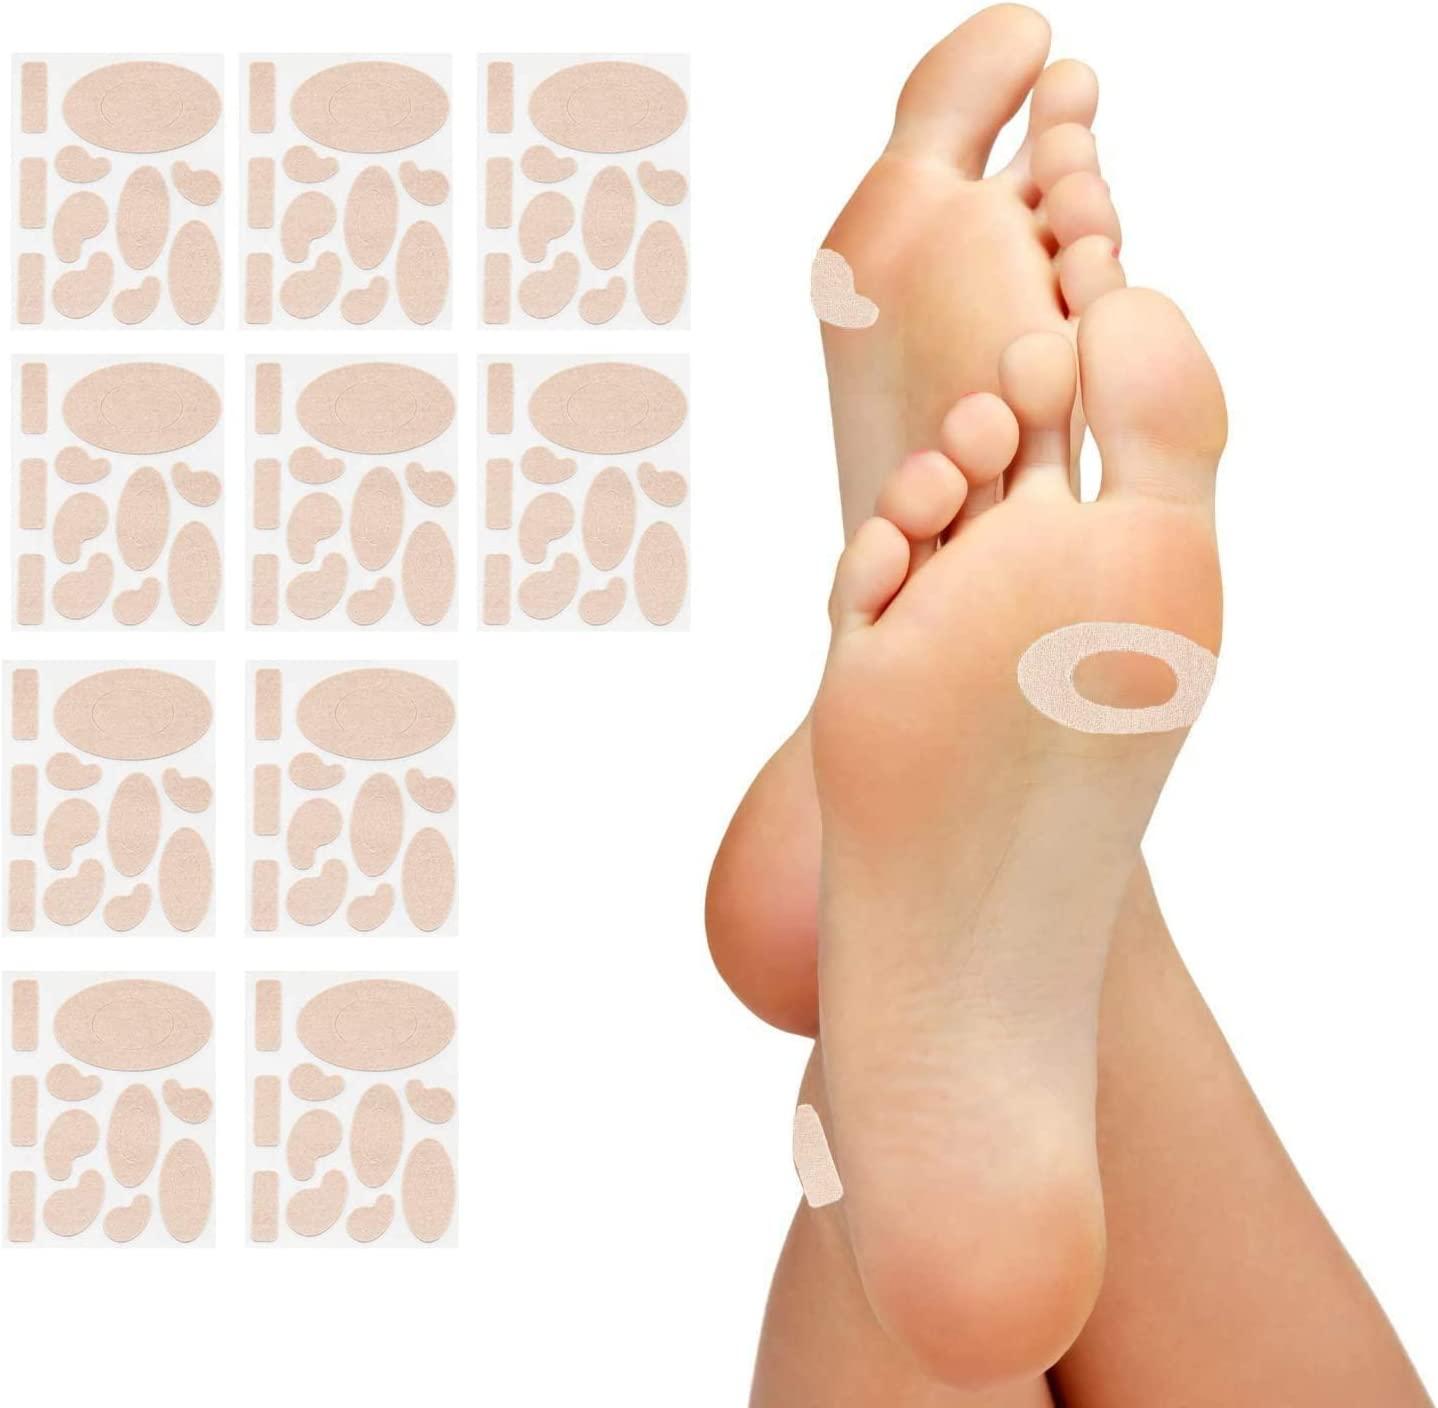 Moleskin Adhesive Pads for Feet - Blister Prevention Padding - 110 pieces -  10 Sheets of 11 Shapes(110 Pieces Total)